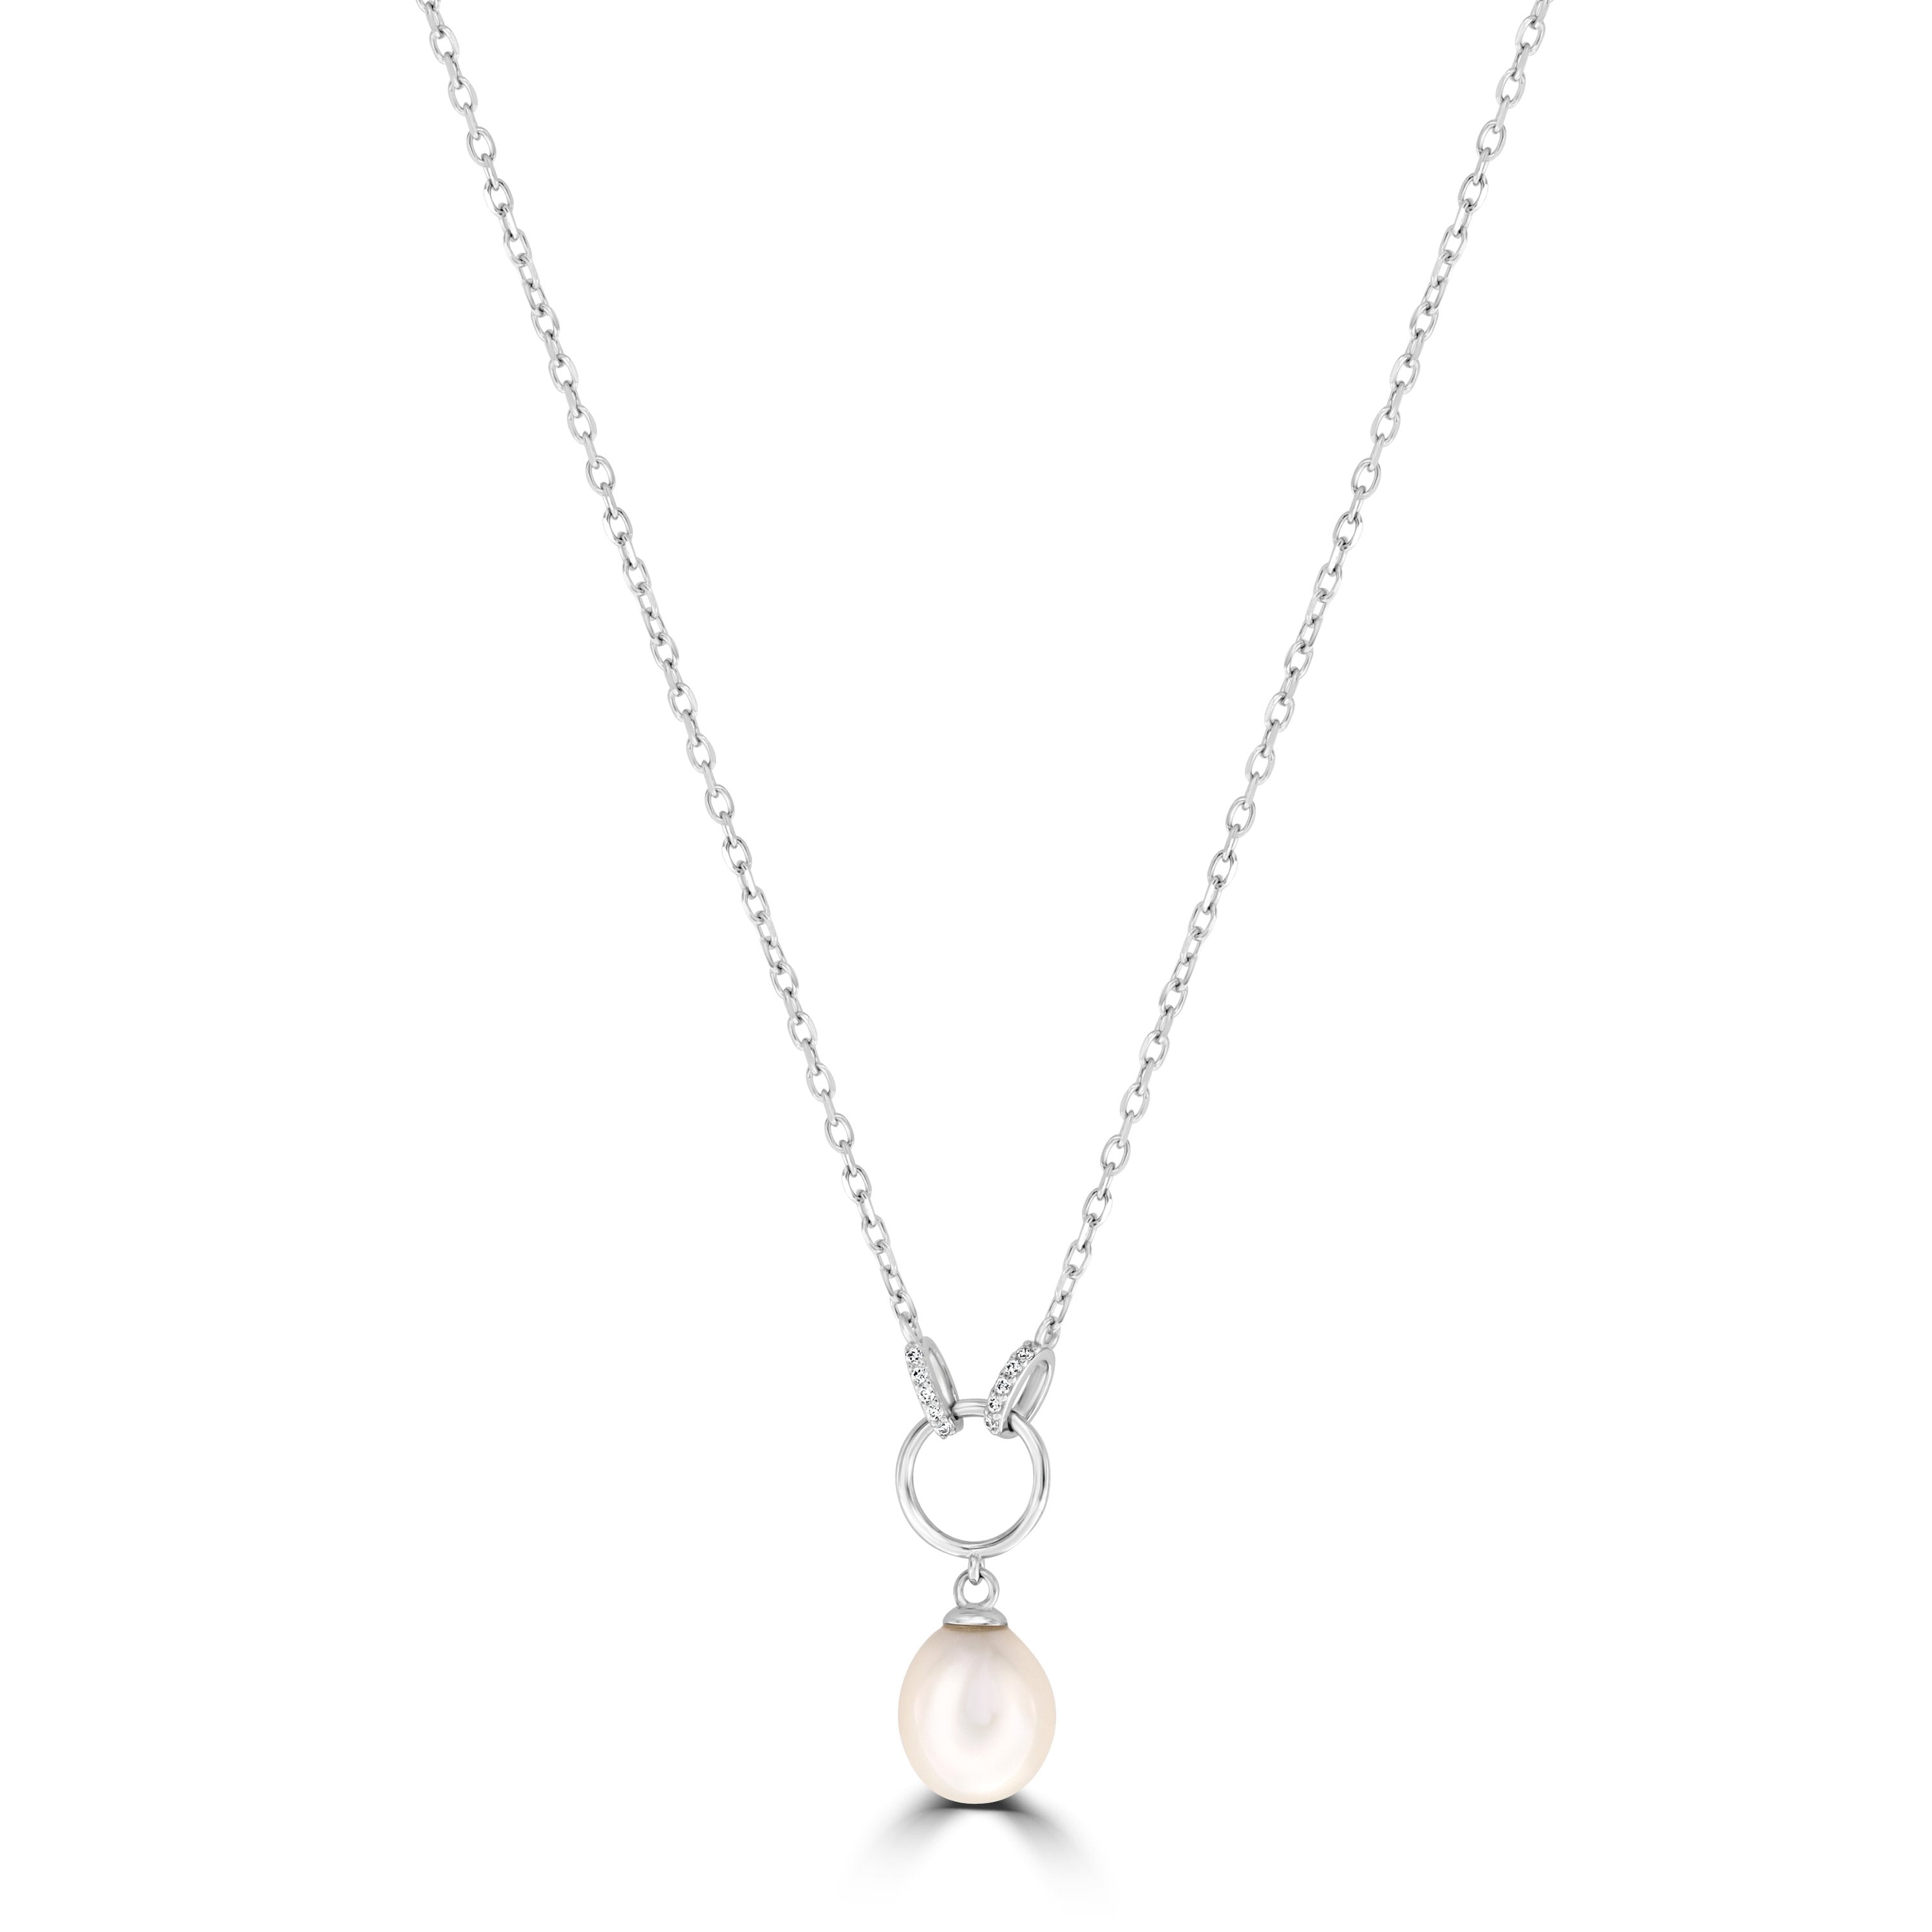 Sterling Silver Necklace With 9-9.5mm Drop Shape Freshwater Pearl & Cubic Zirconia (6624744669348) (7077459361956)